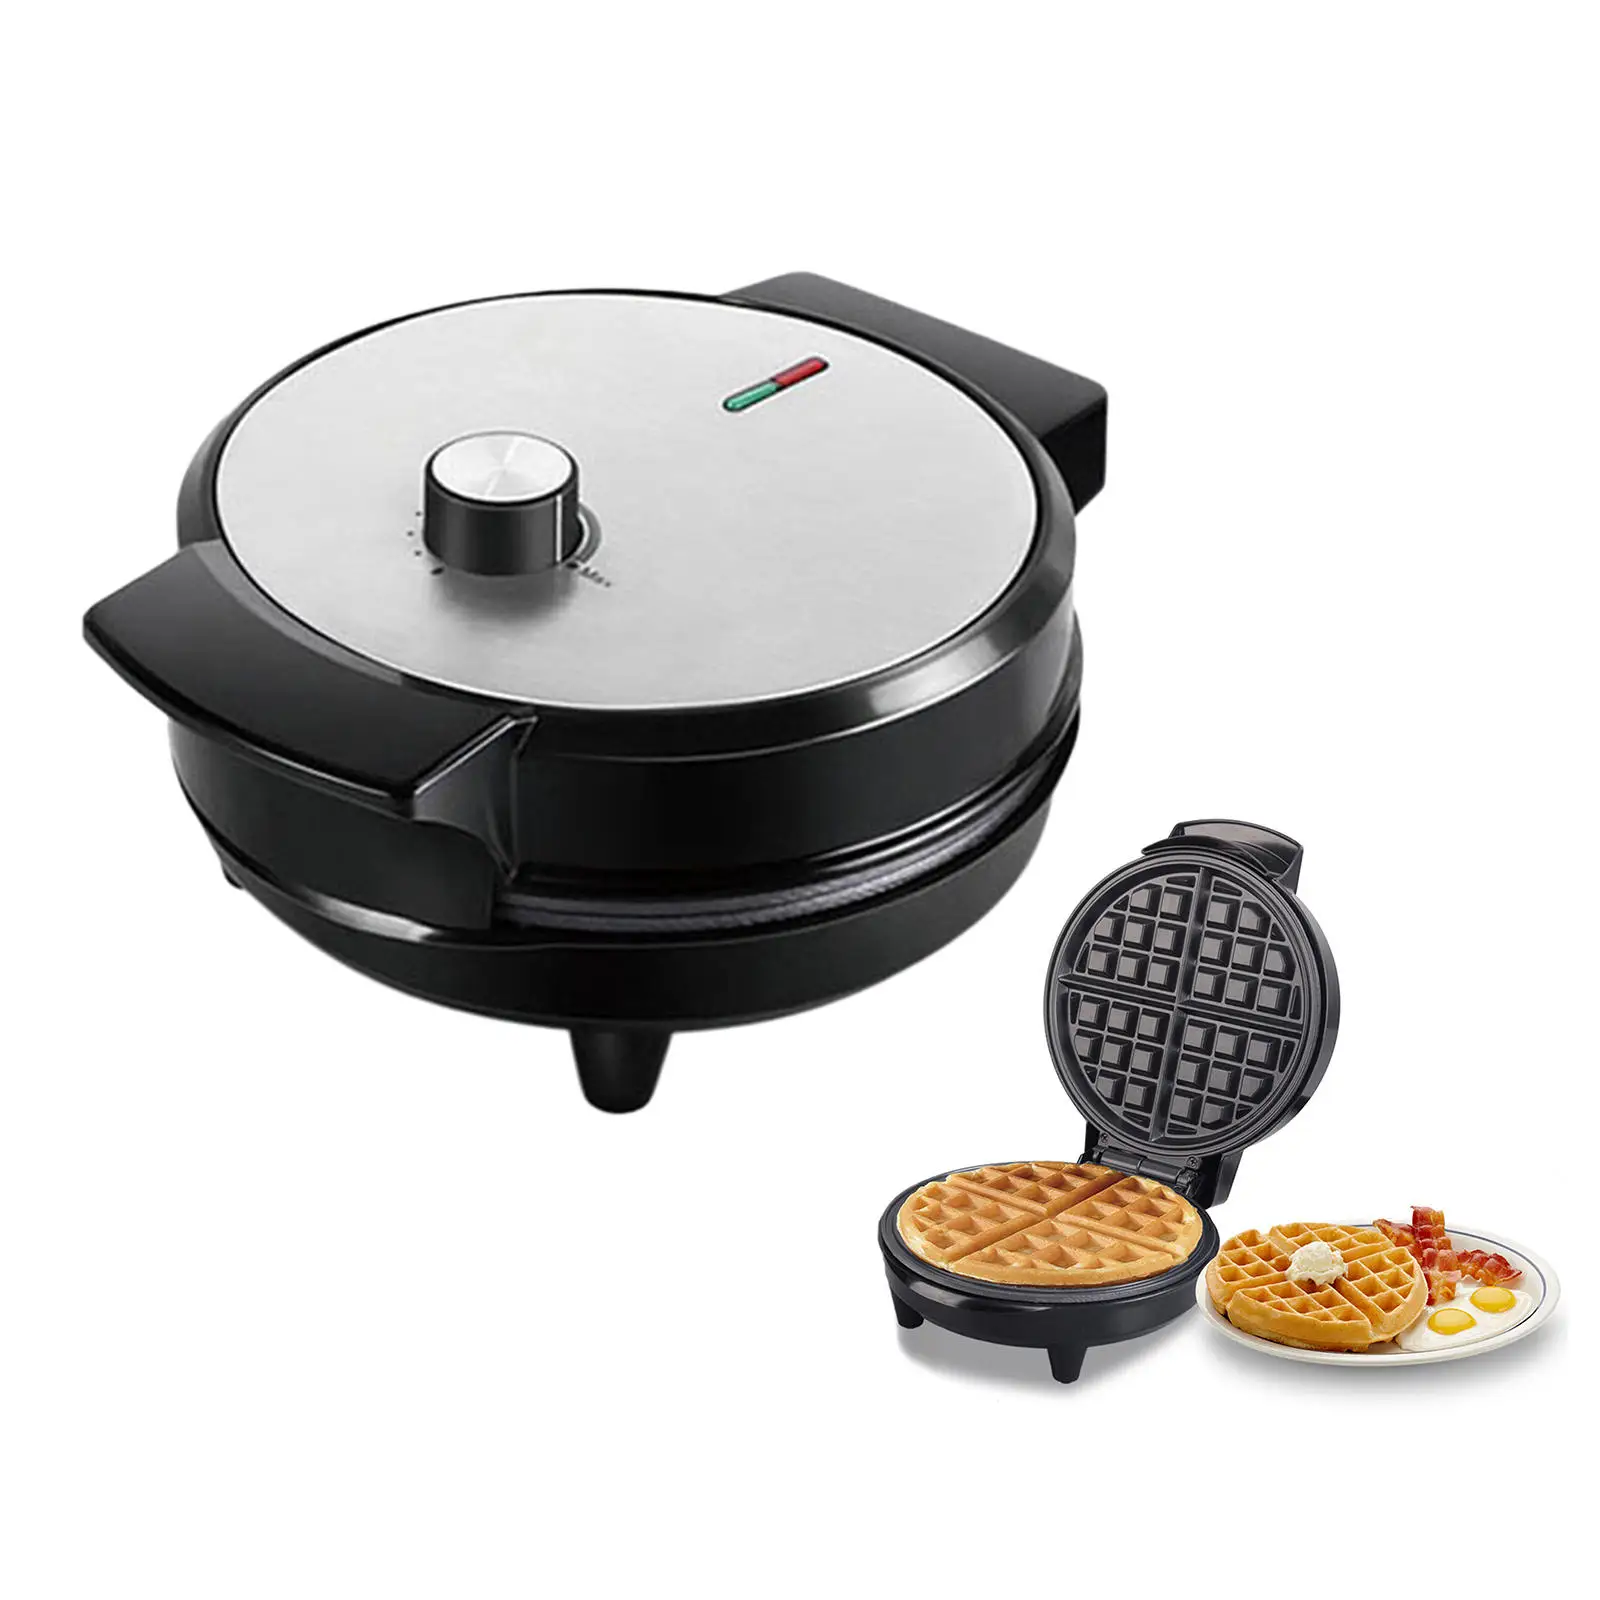 Stainless Steel Waffle Maker Adjustable Cooking Tools Waffles Iron Baking Toaster 220V Waffle Making Machine for Home Kitchen